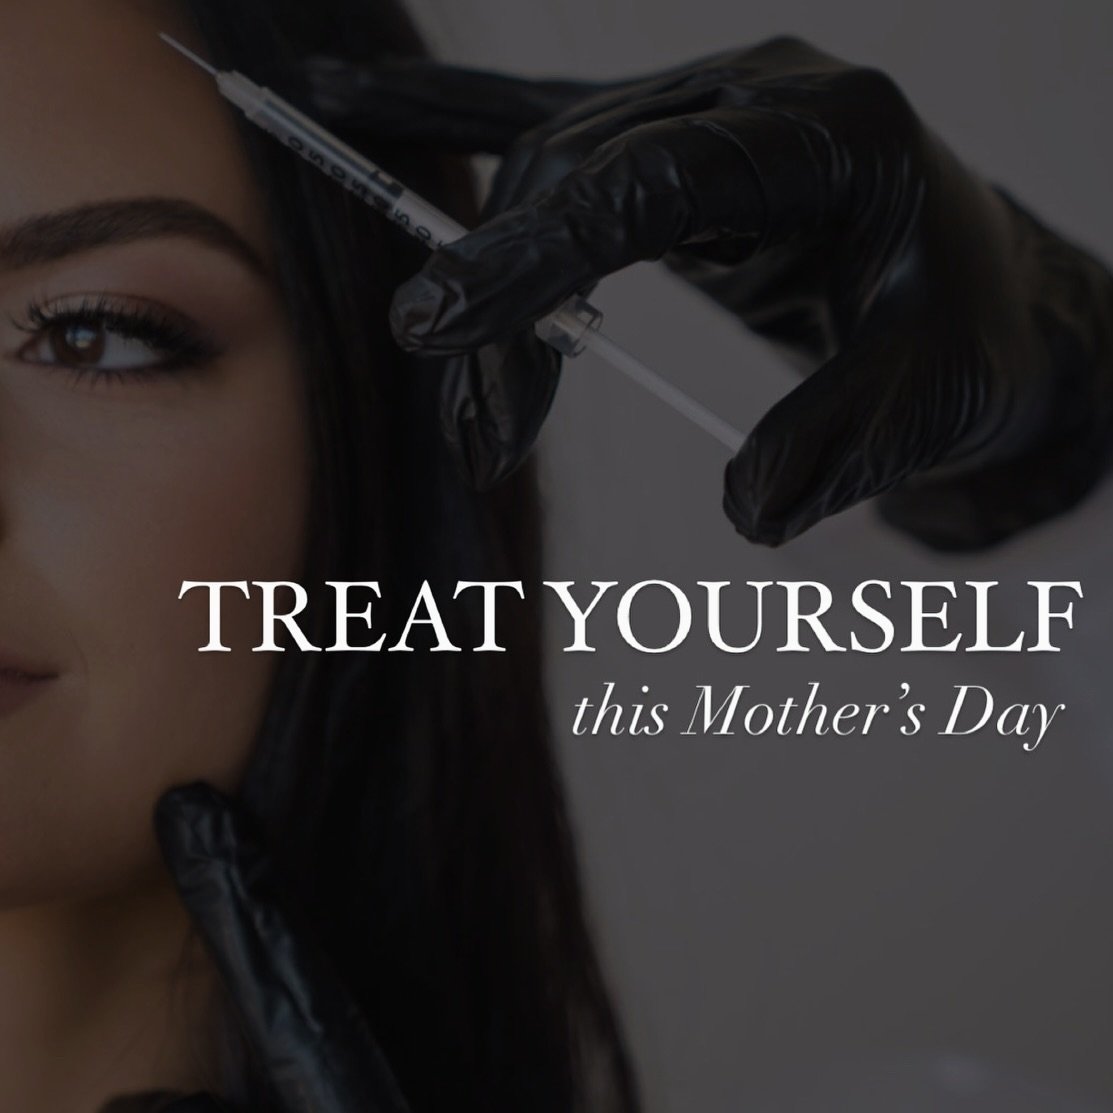 💖 Treat yourself this Mother&rsquo;s Day! 💖 Whether it&rsquo;s Botox, lip fillers, laser hair removal, or any other pampering you desire, we&rsquo;ve got you covered at THE LUXE MEDSPA. 

Because every mom deserves a little extra love and self-care